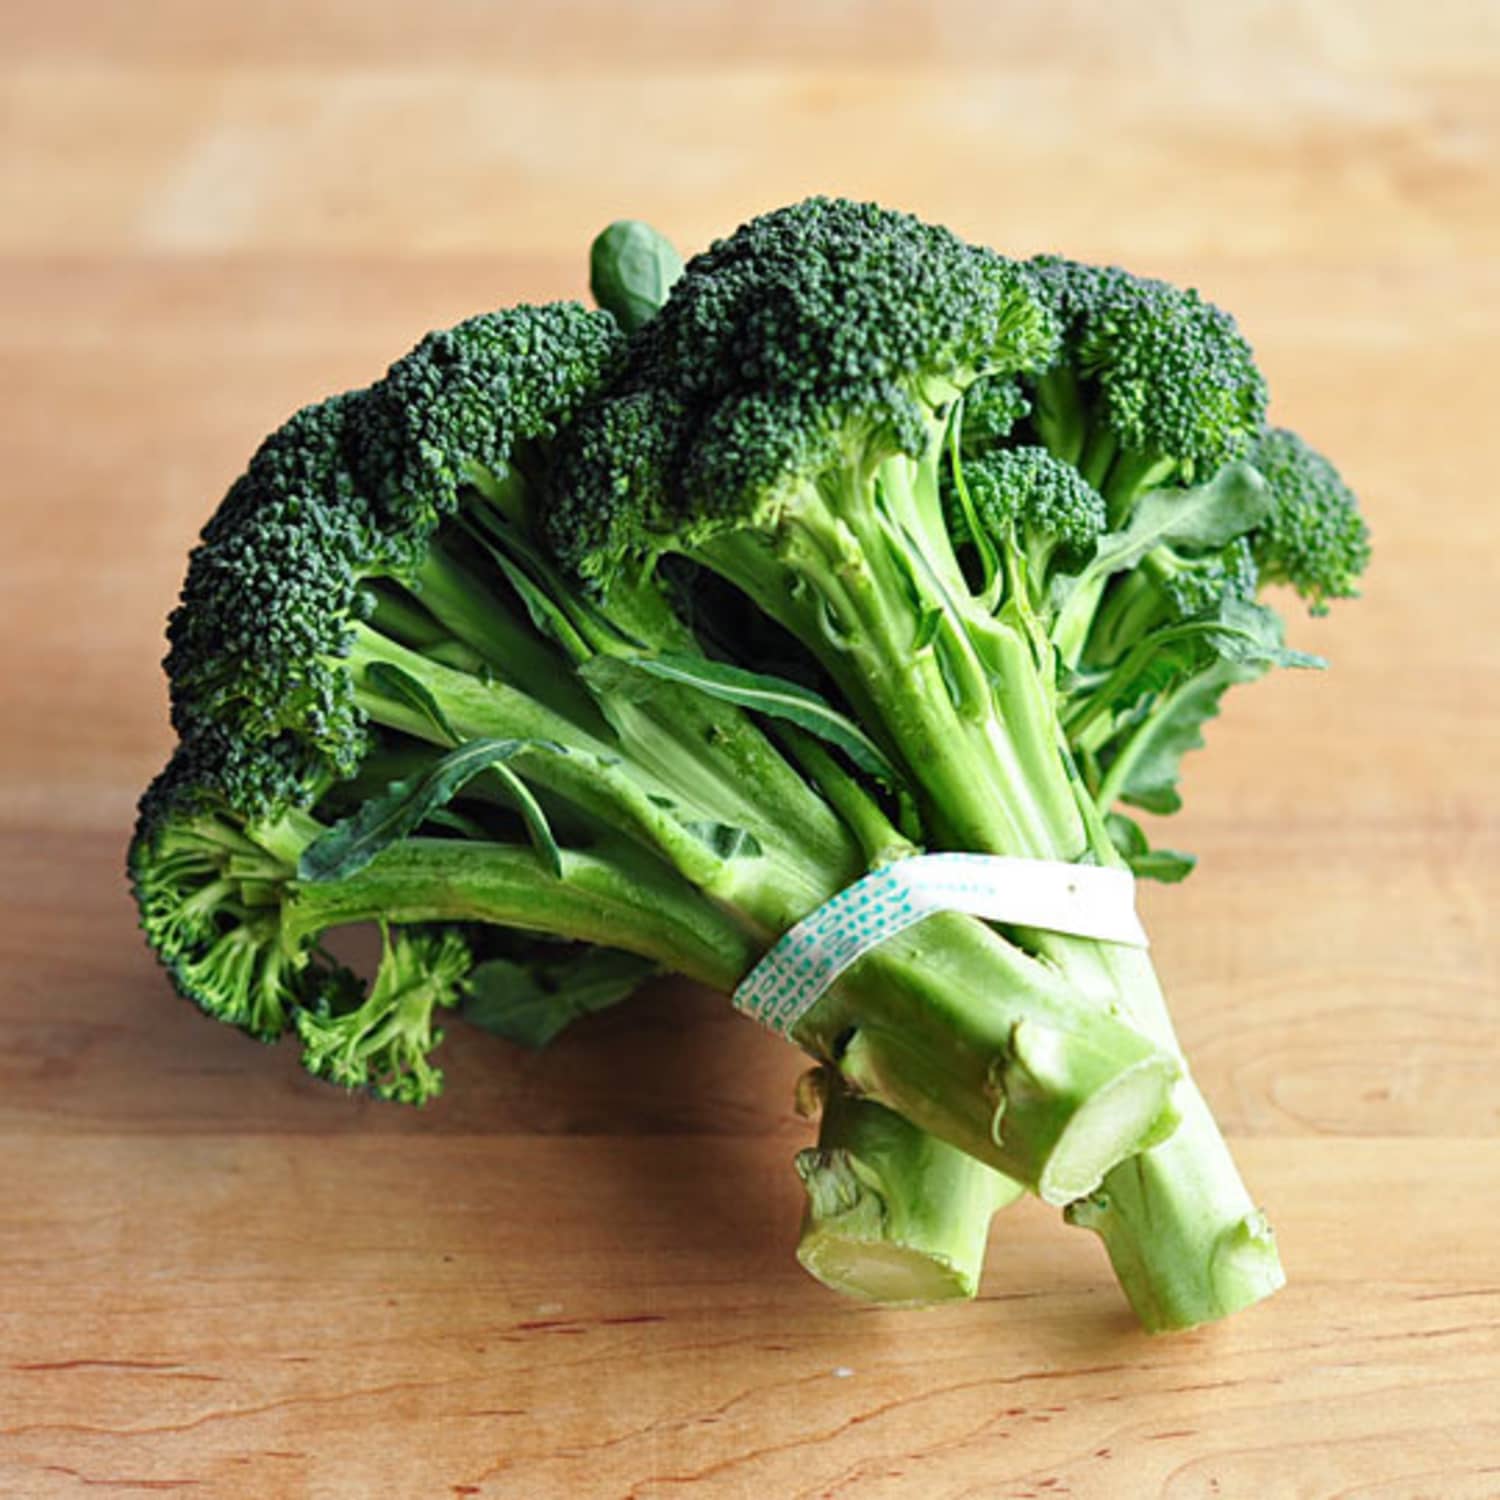 How To Cook Broccoli, 5 Ways | Kitchn